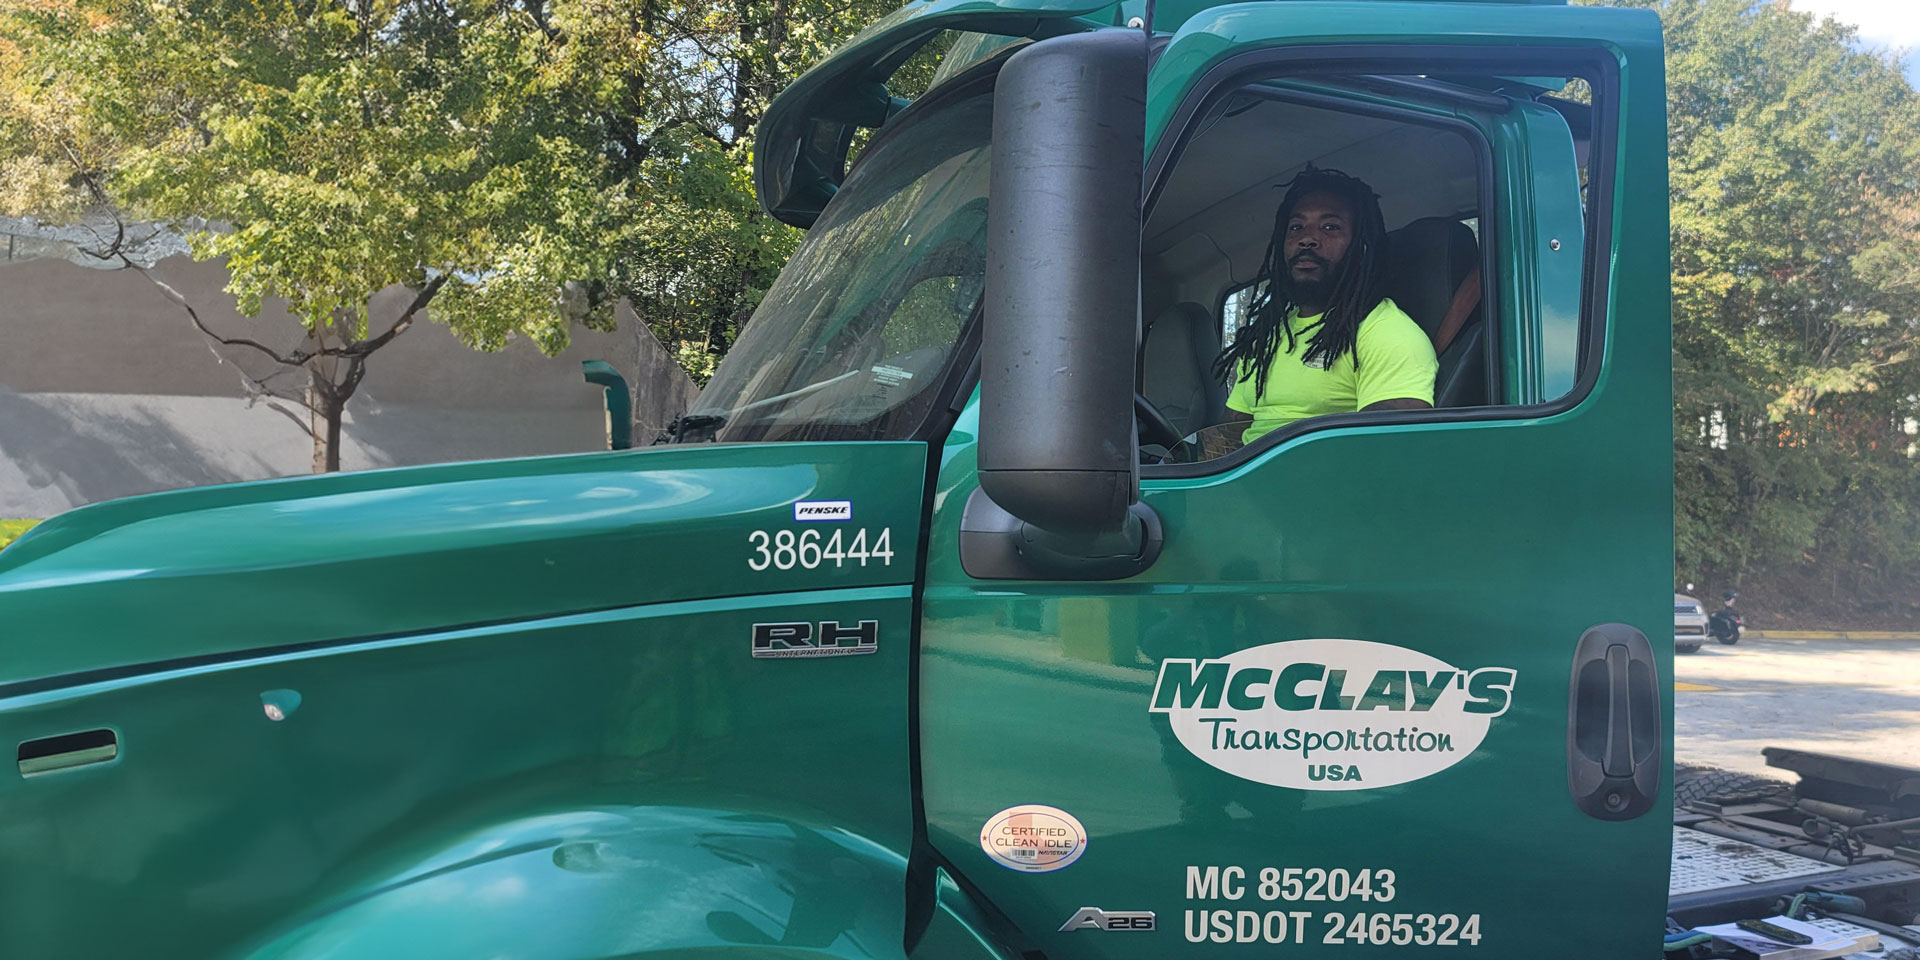 McClay's truck driver behind the wheel of a green semi truck